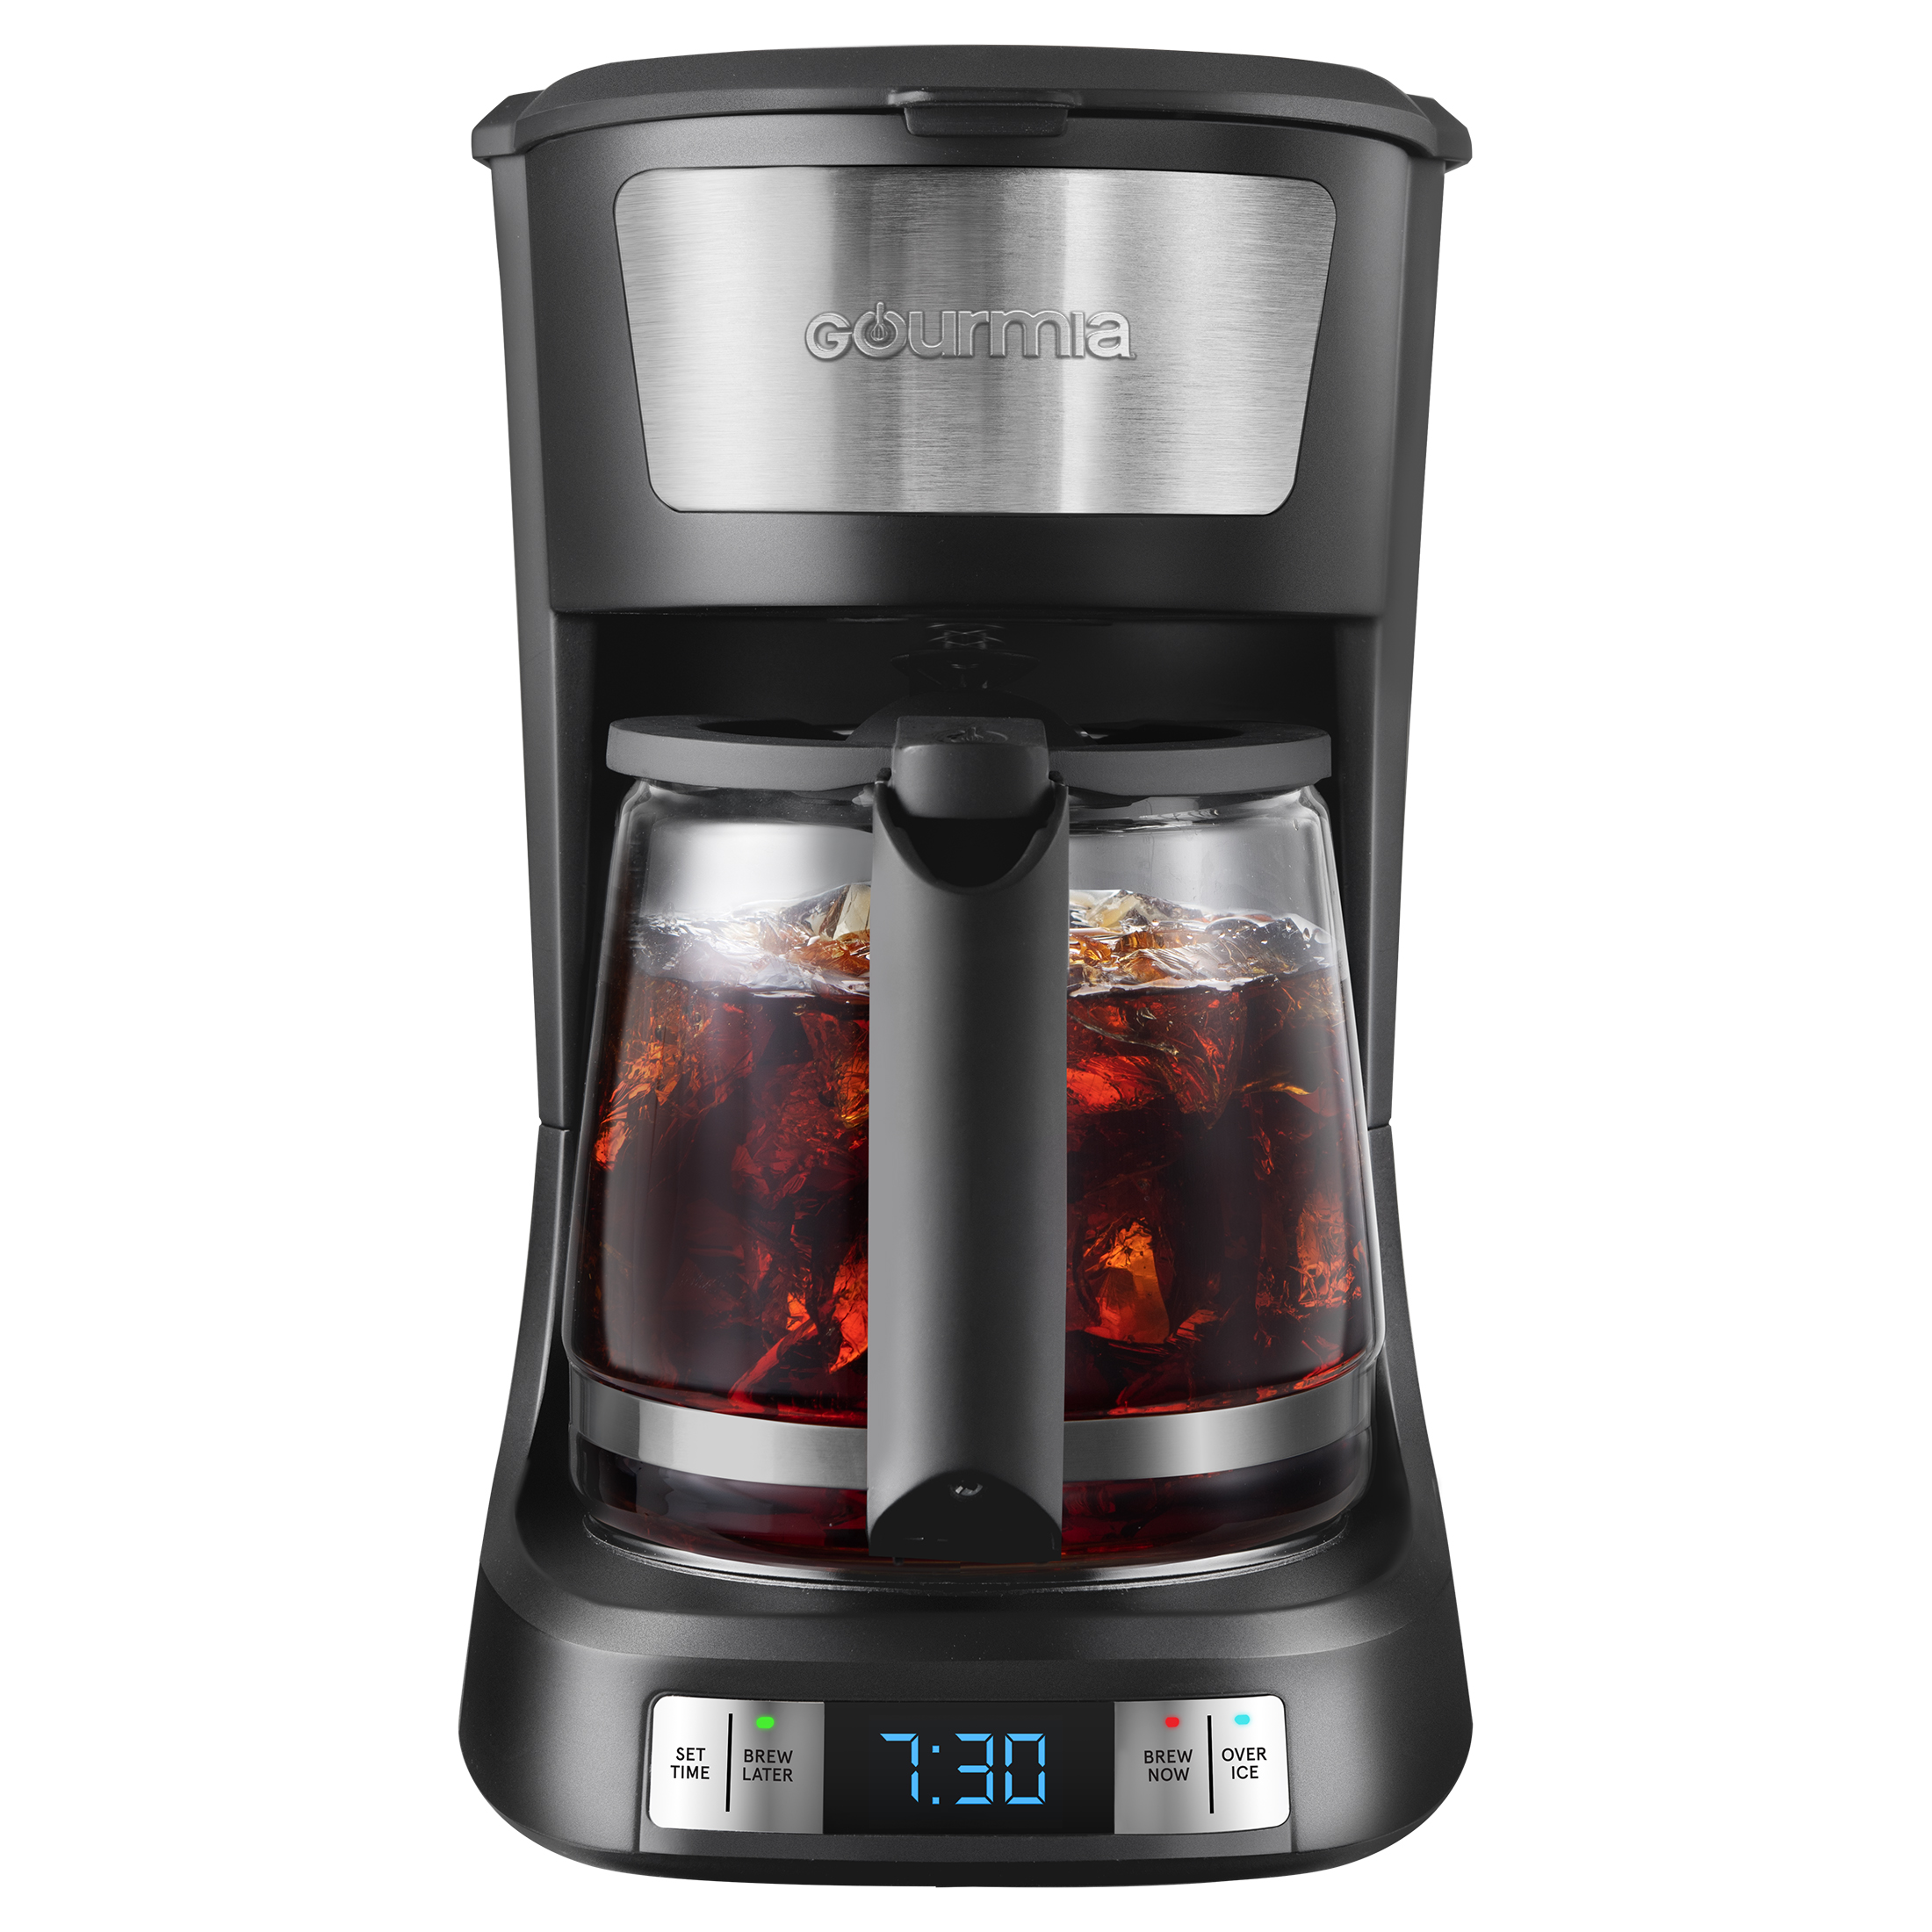 Gourmia 12 Cup Programmable Hot & Iced Coffee Maker with Keep Warm Feature - Black, New - image 1 of 7